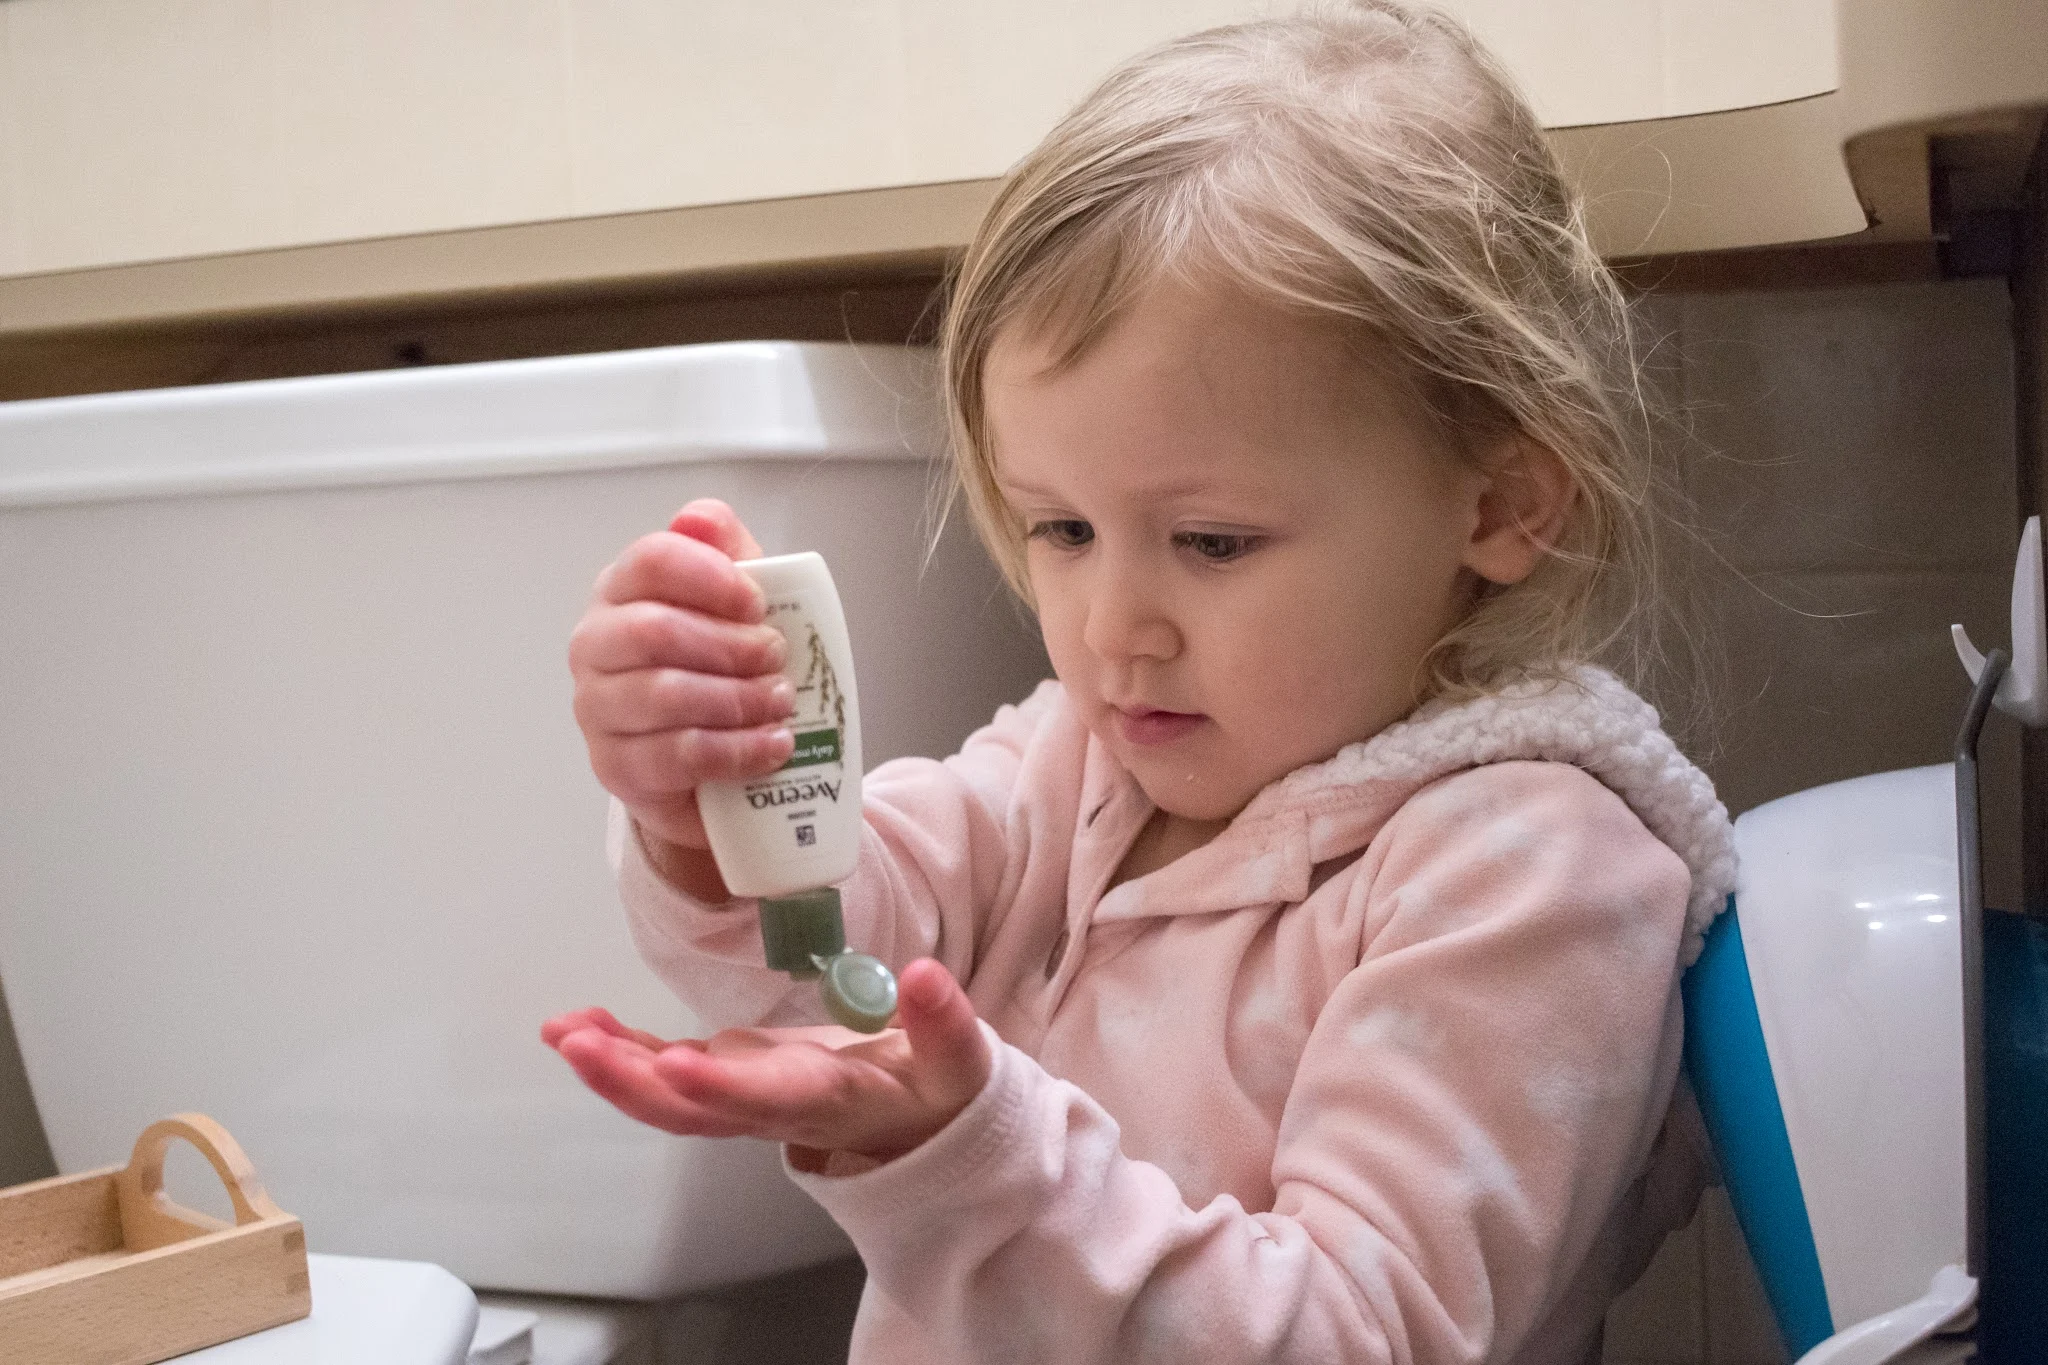 Montessori self-care: some lotion and chap-stick on a tray is perfect for toddlers all winter long